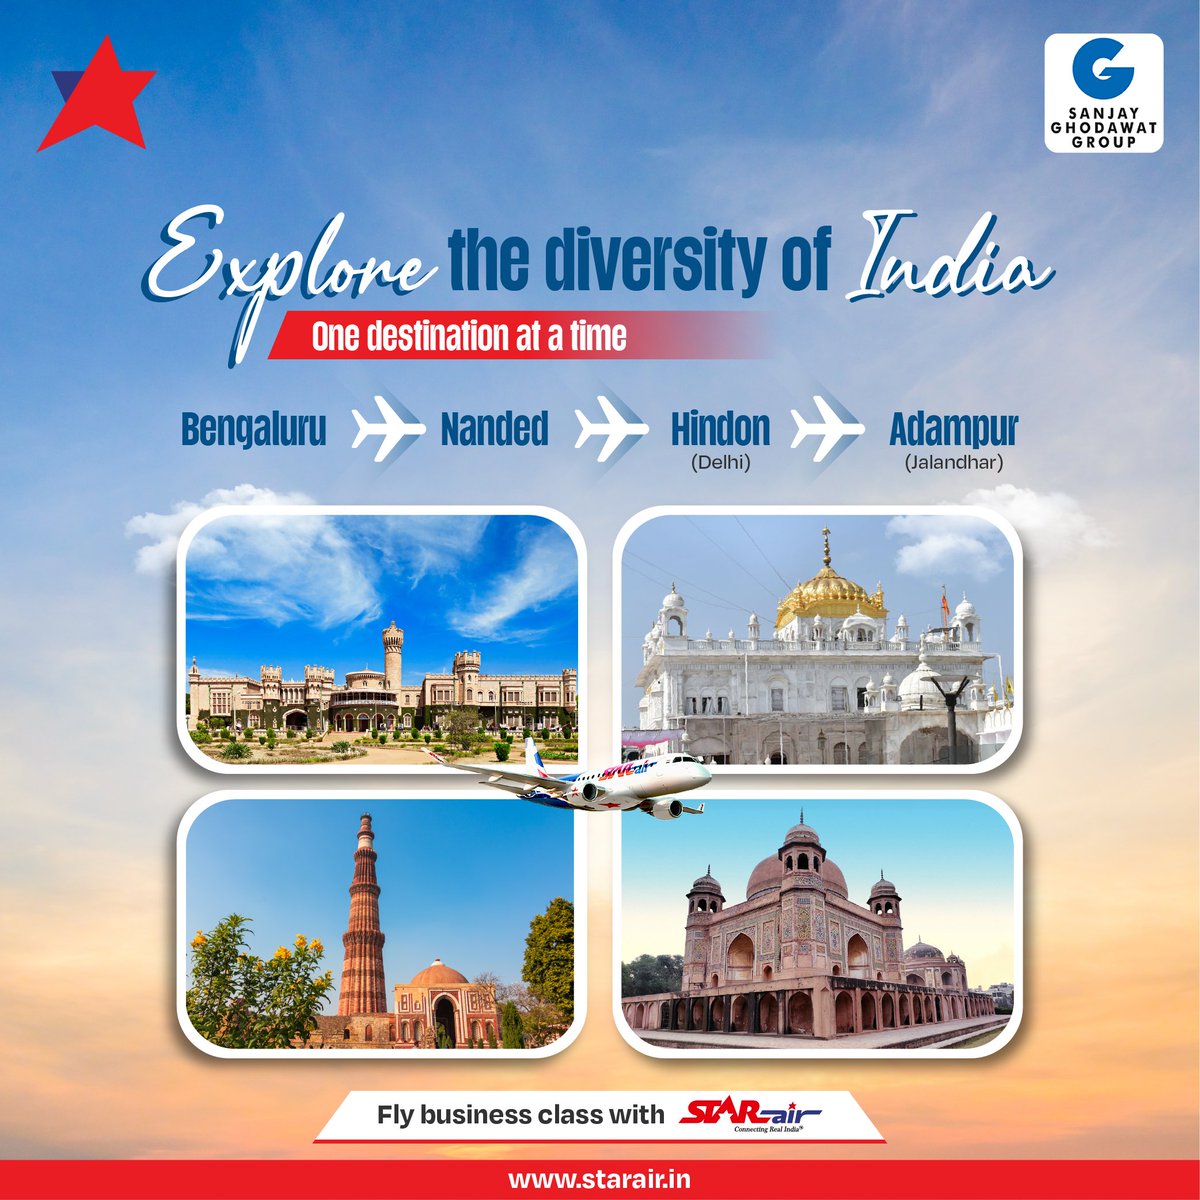 Experience the Rich Tapestry of India's Diversity ✨ Fly from the bustling streets of Bengaluru to the serene landscapes of Nanded, the vibrant culture of Hindon, and the historical charm of Adampur. Stay tuned for more updates!
#StarAir #ExploreIndia #NewDestinations #FlyStarAir